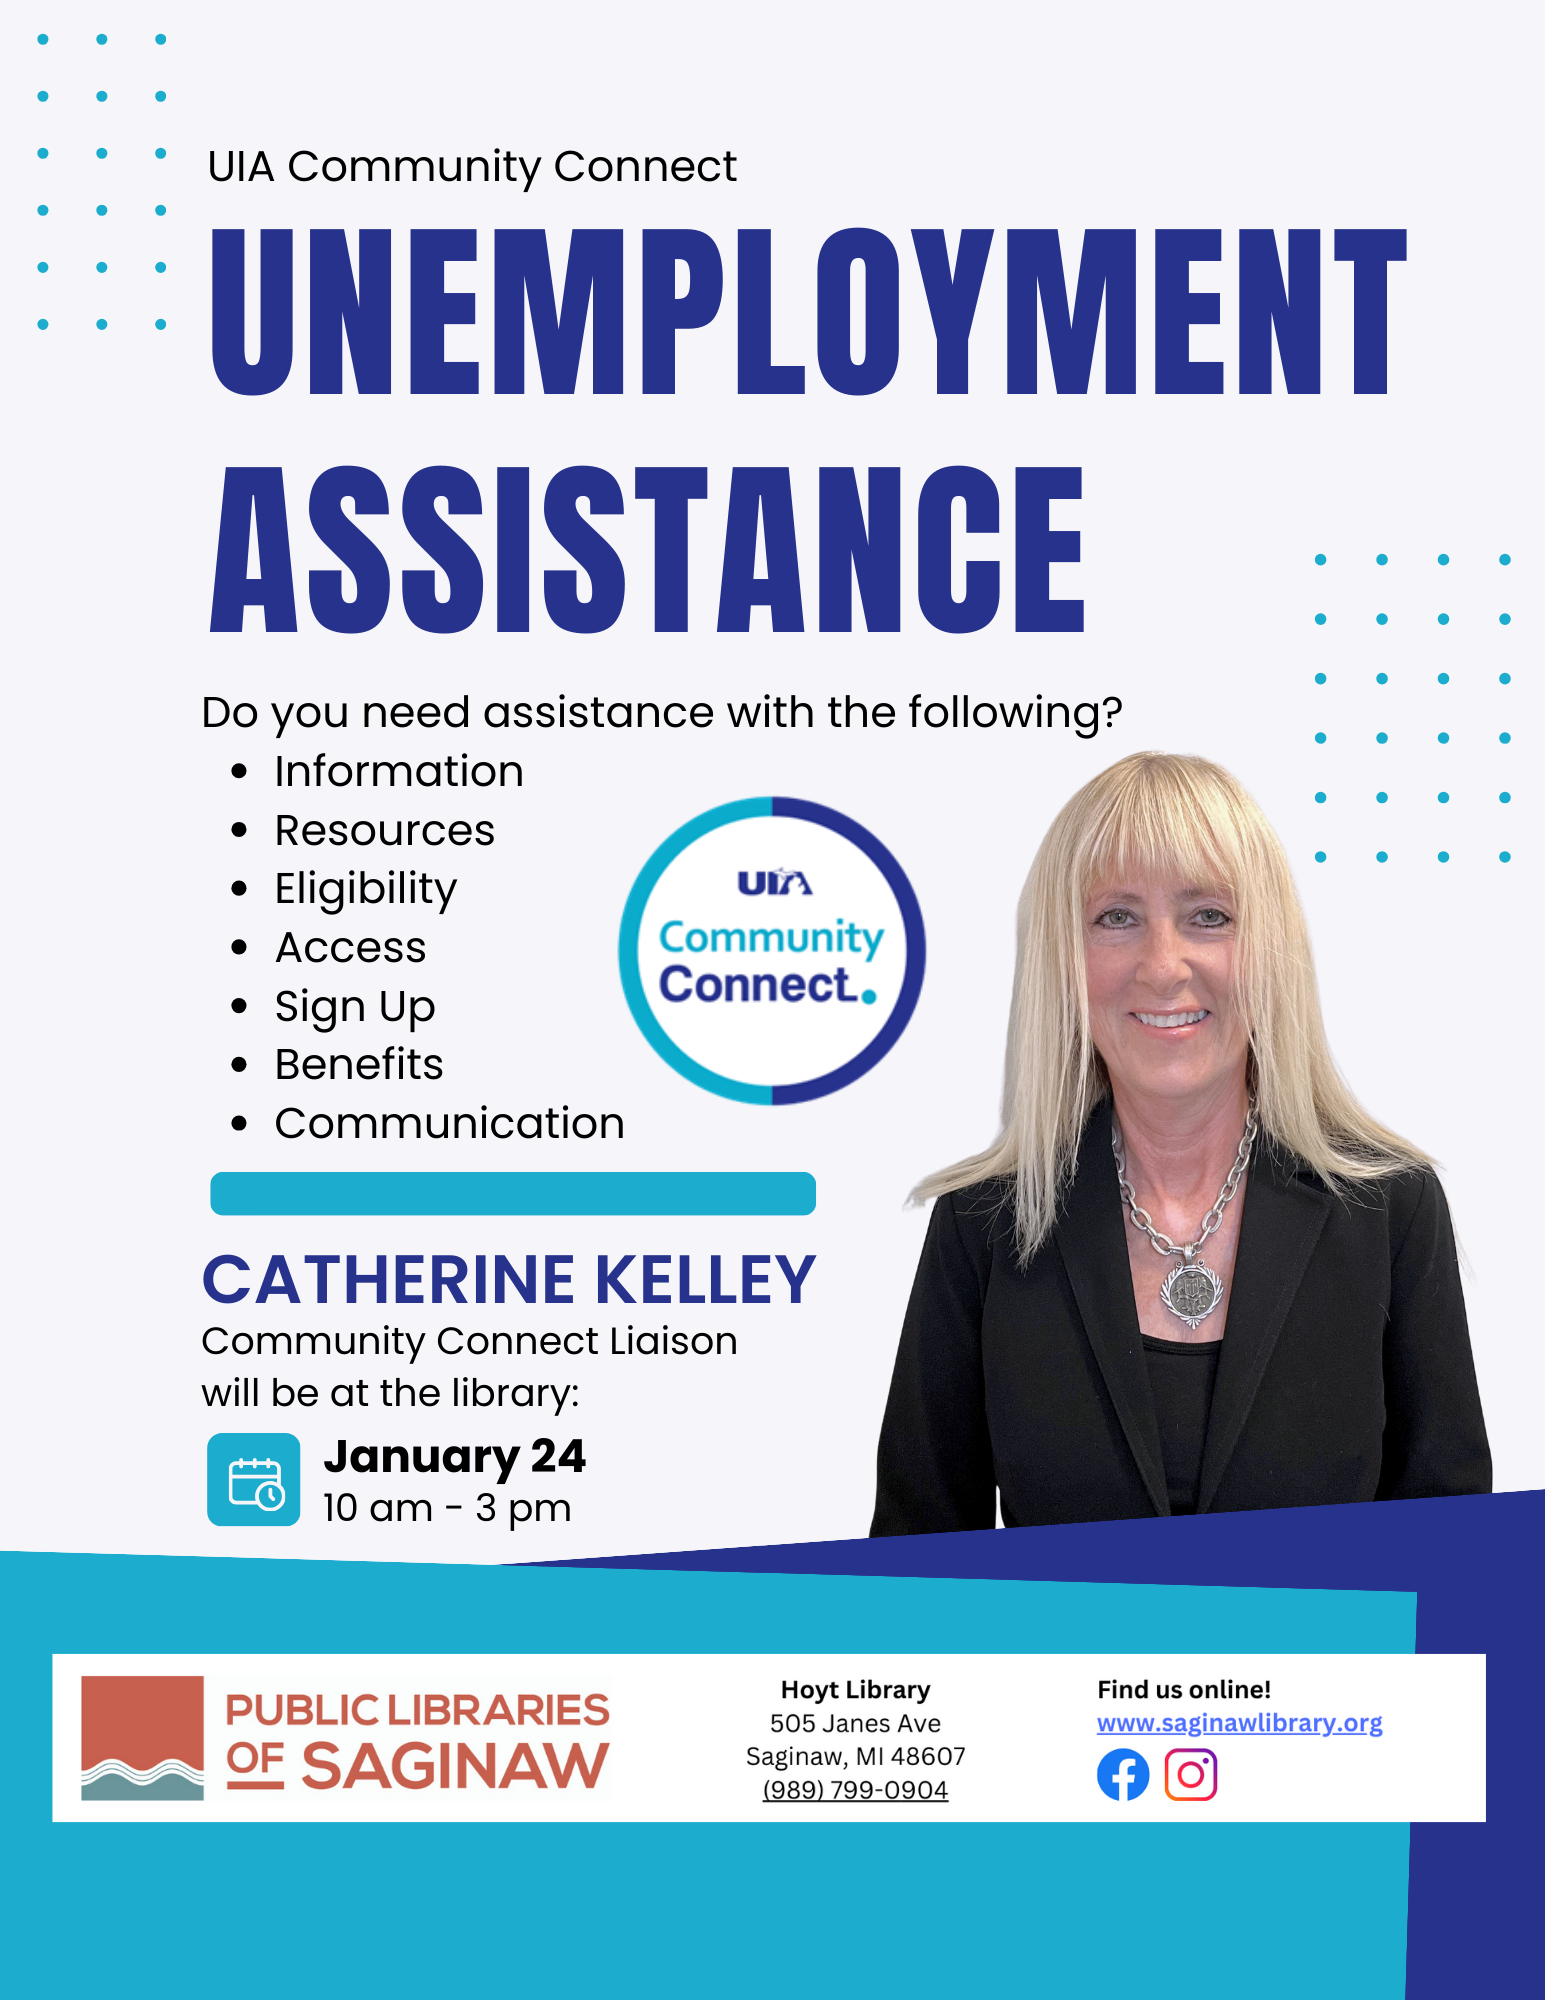 Catherine Kelley, Community Connect Liaison with the Unemployment Insurance Agency - UIA, will be here from 10 a.m. until 3 p.m. to assist you with your unemployment benefits.  She will help you with information, resources, eligibility, access, sign up, benefits, and communication.